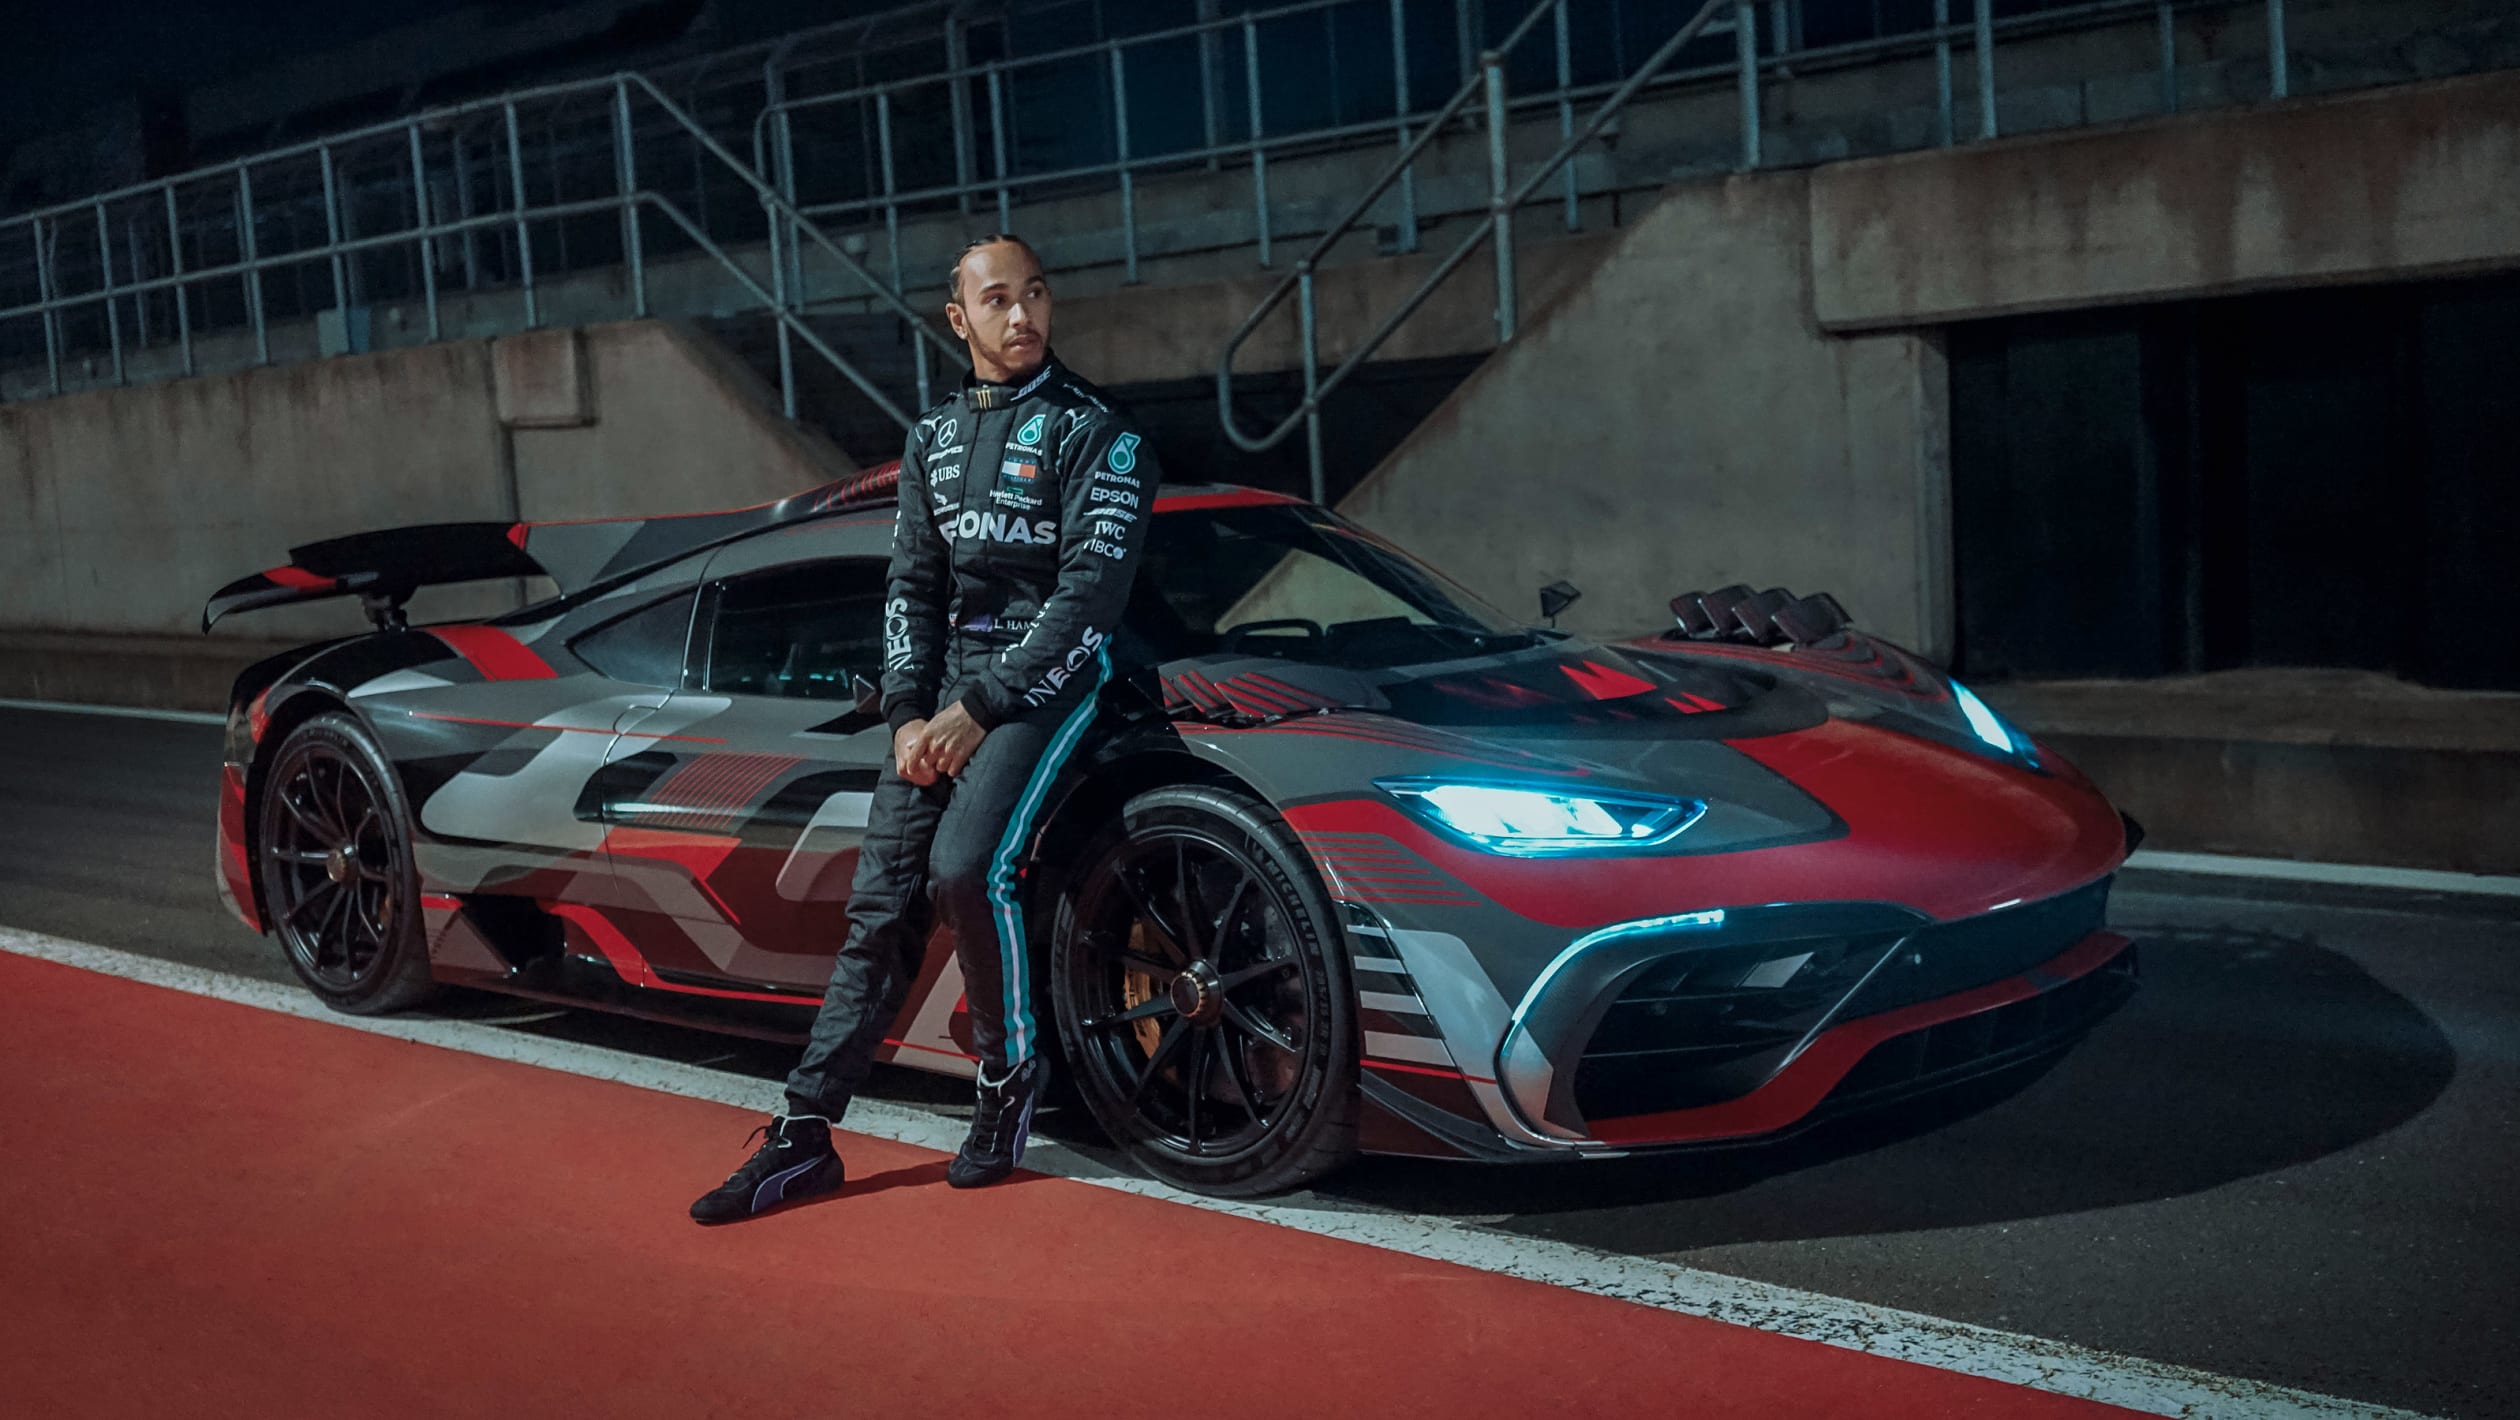 aria-label="Mercedes AMG Project One Lewis Hamilton 6"